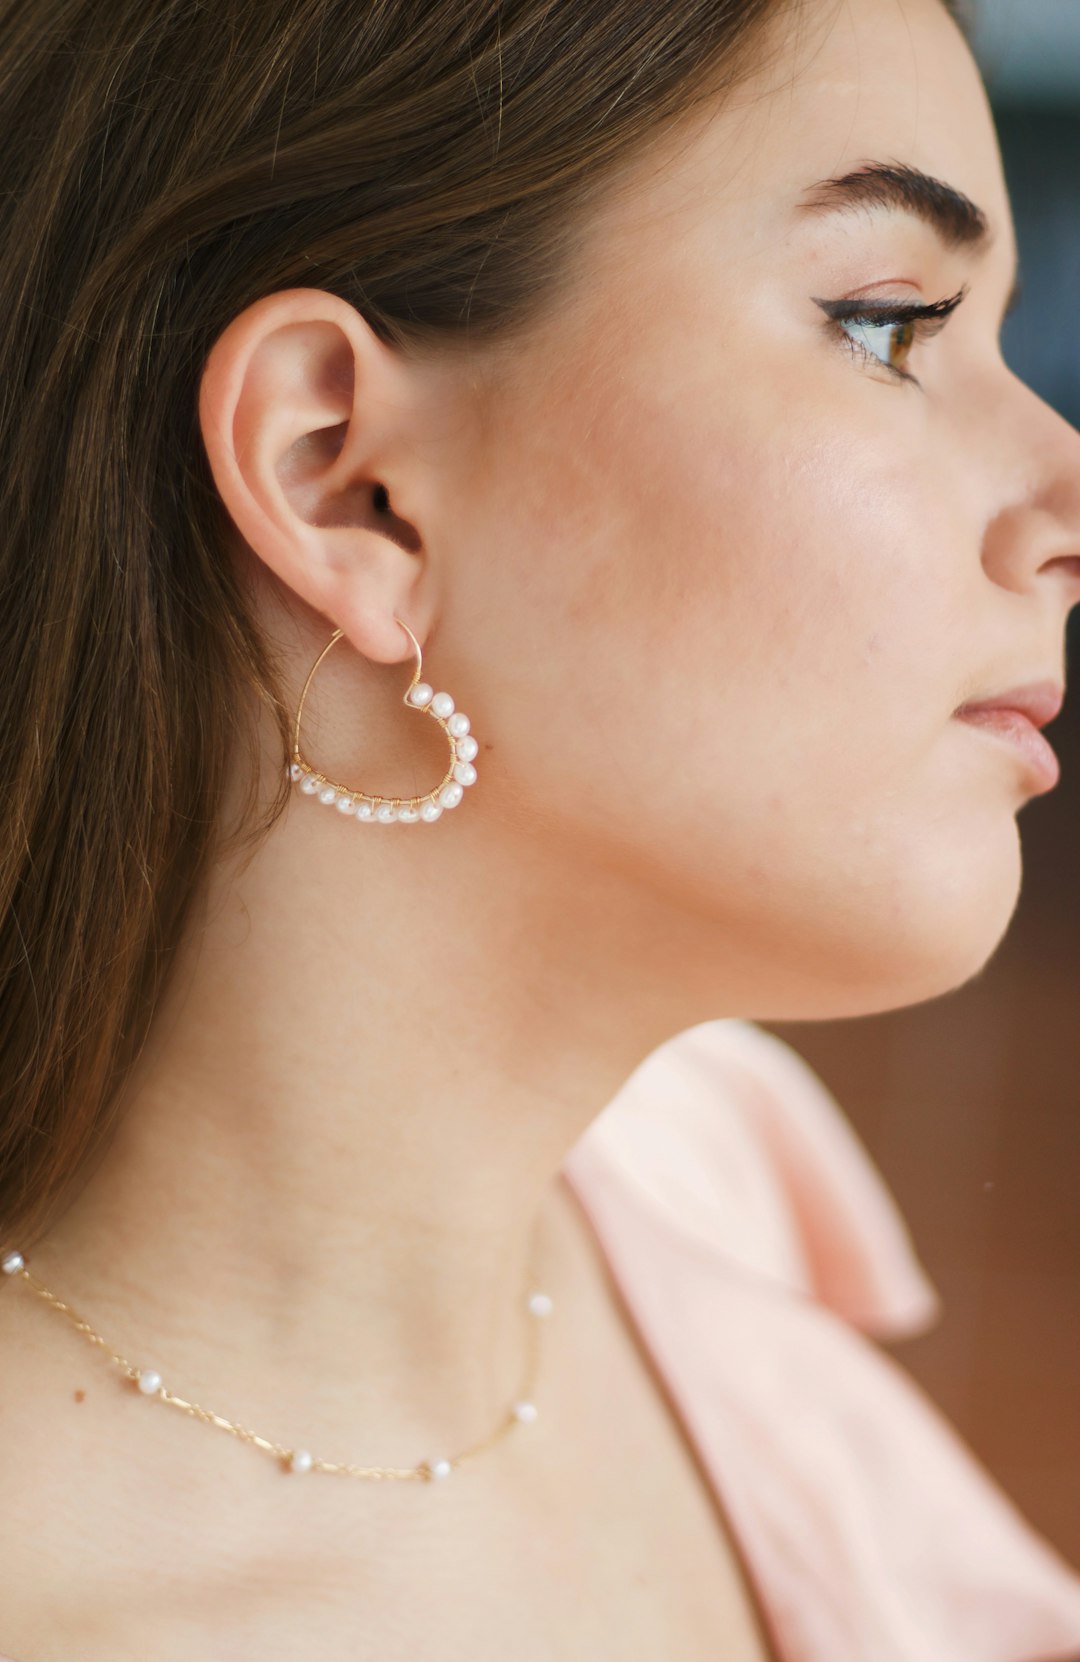 woman wearing silver and white pearl earrings